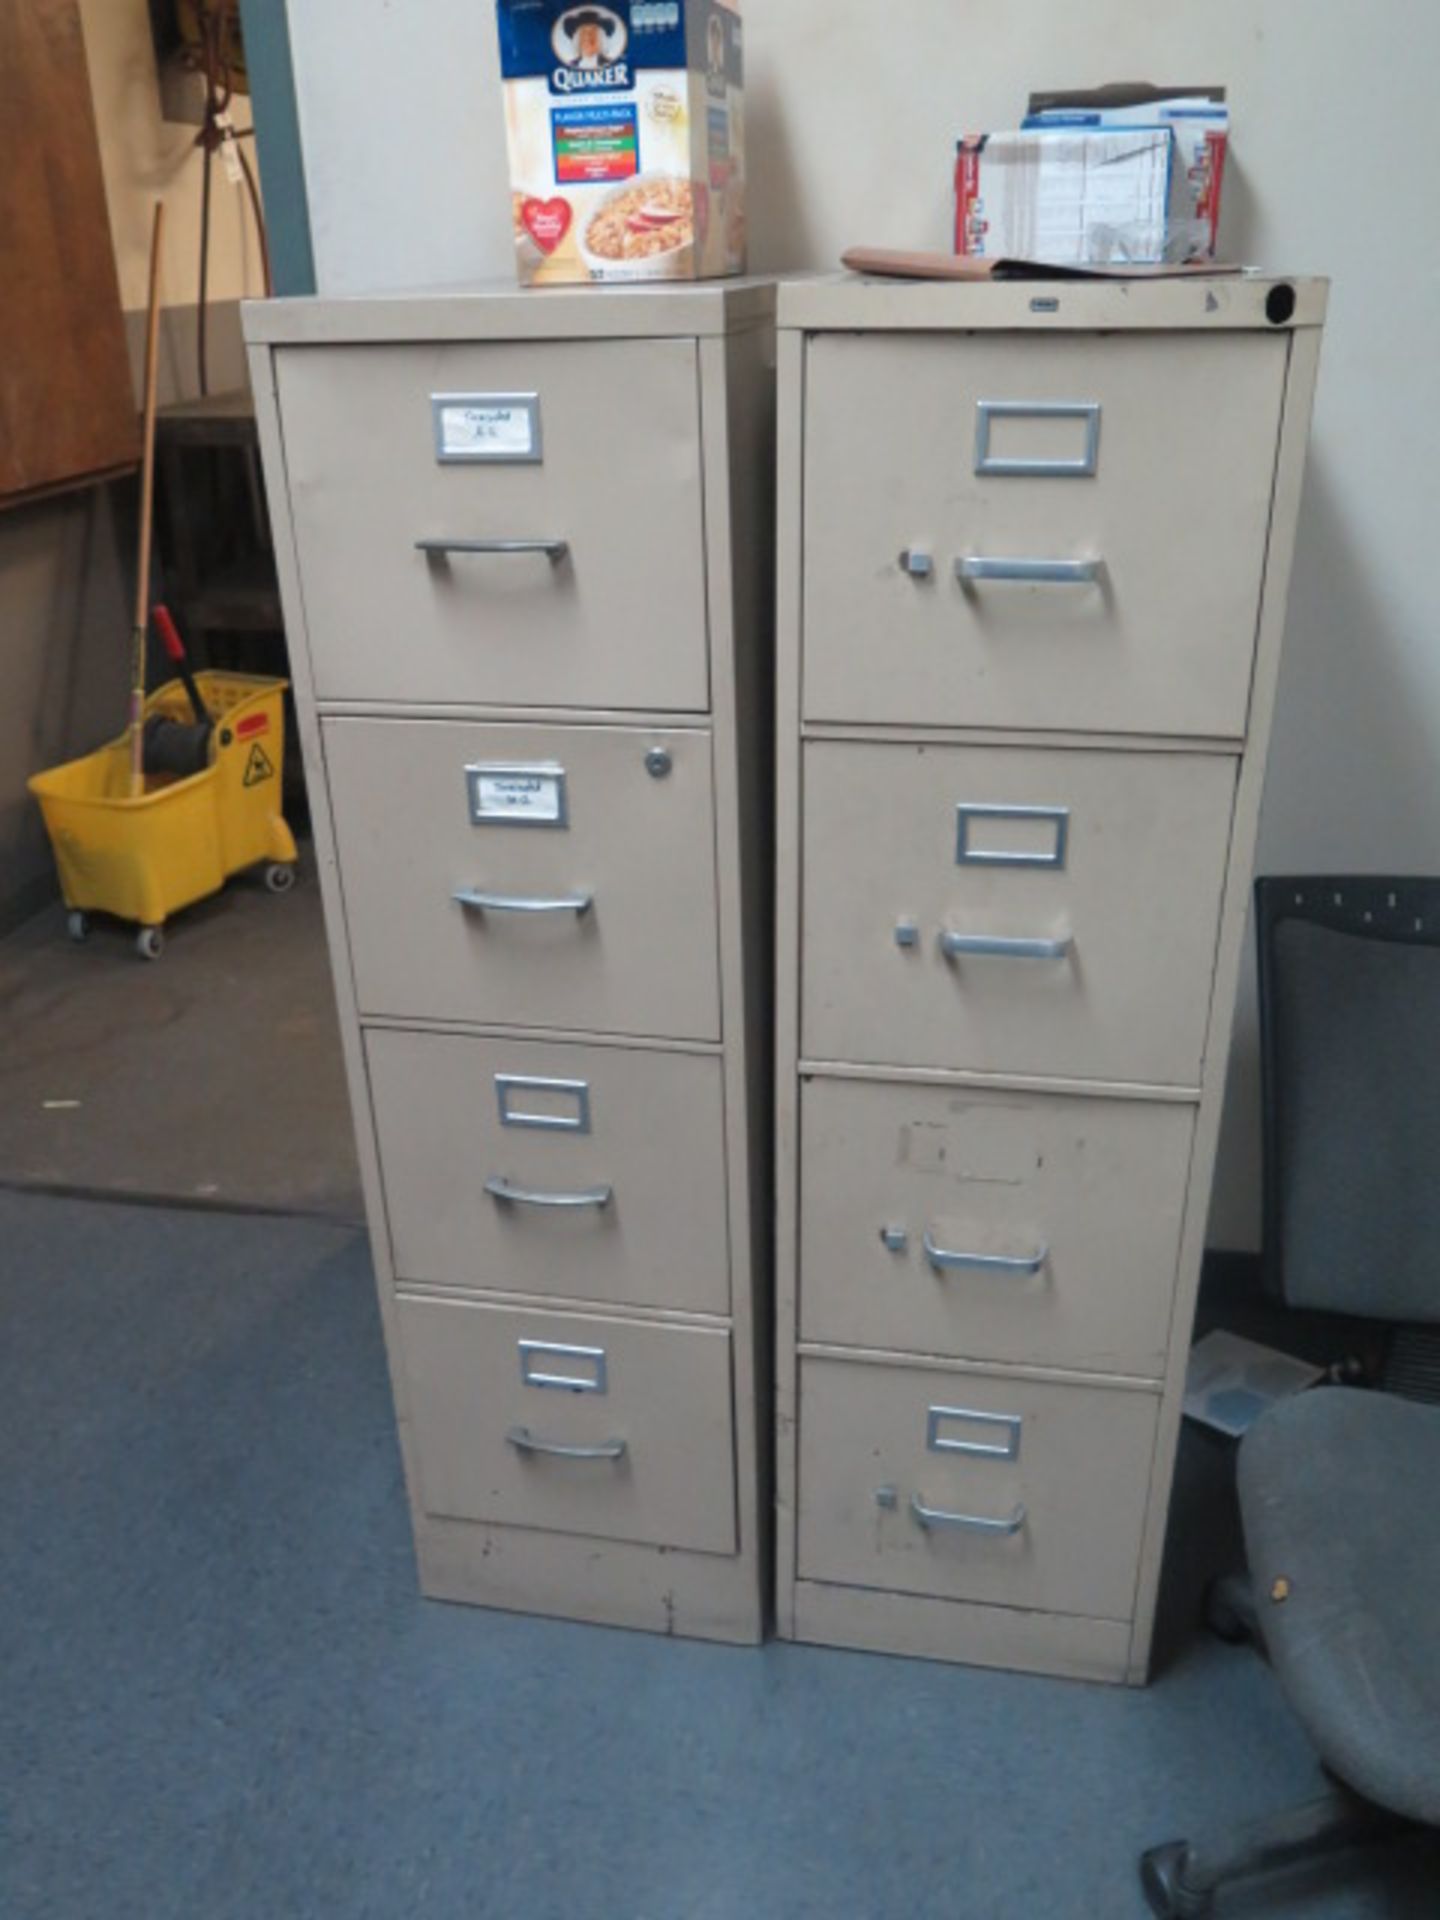 Refrigerator, Microwave, Table and File Cabinets - Image 2 of 2